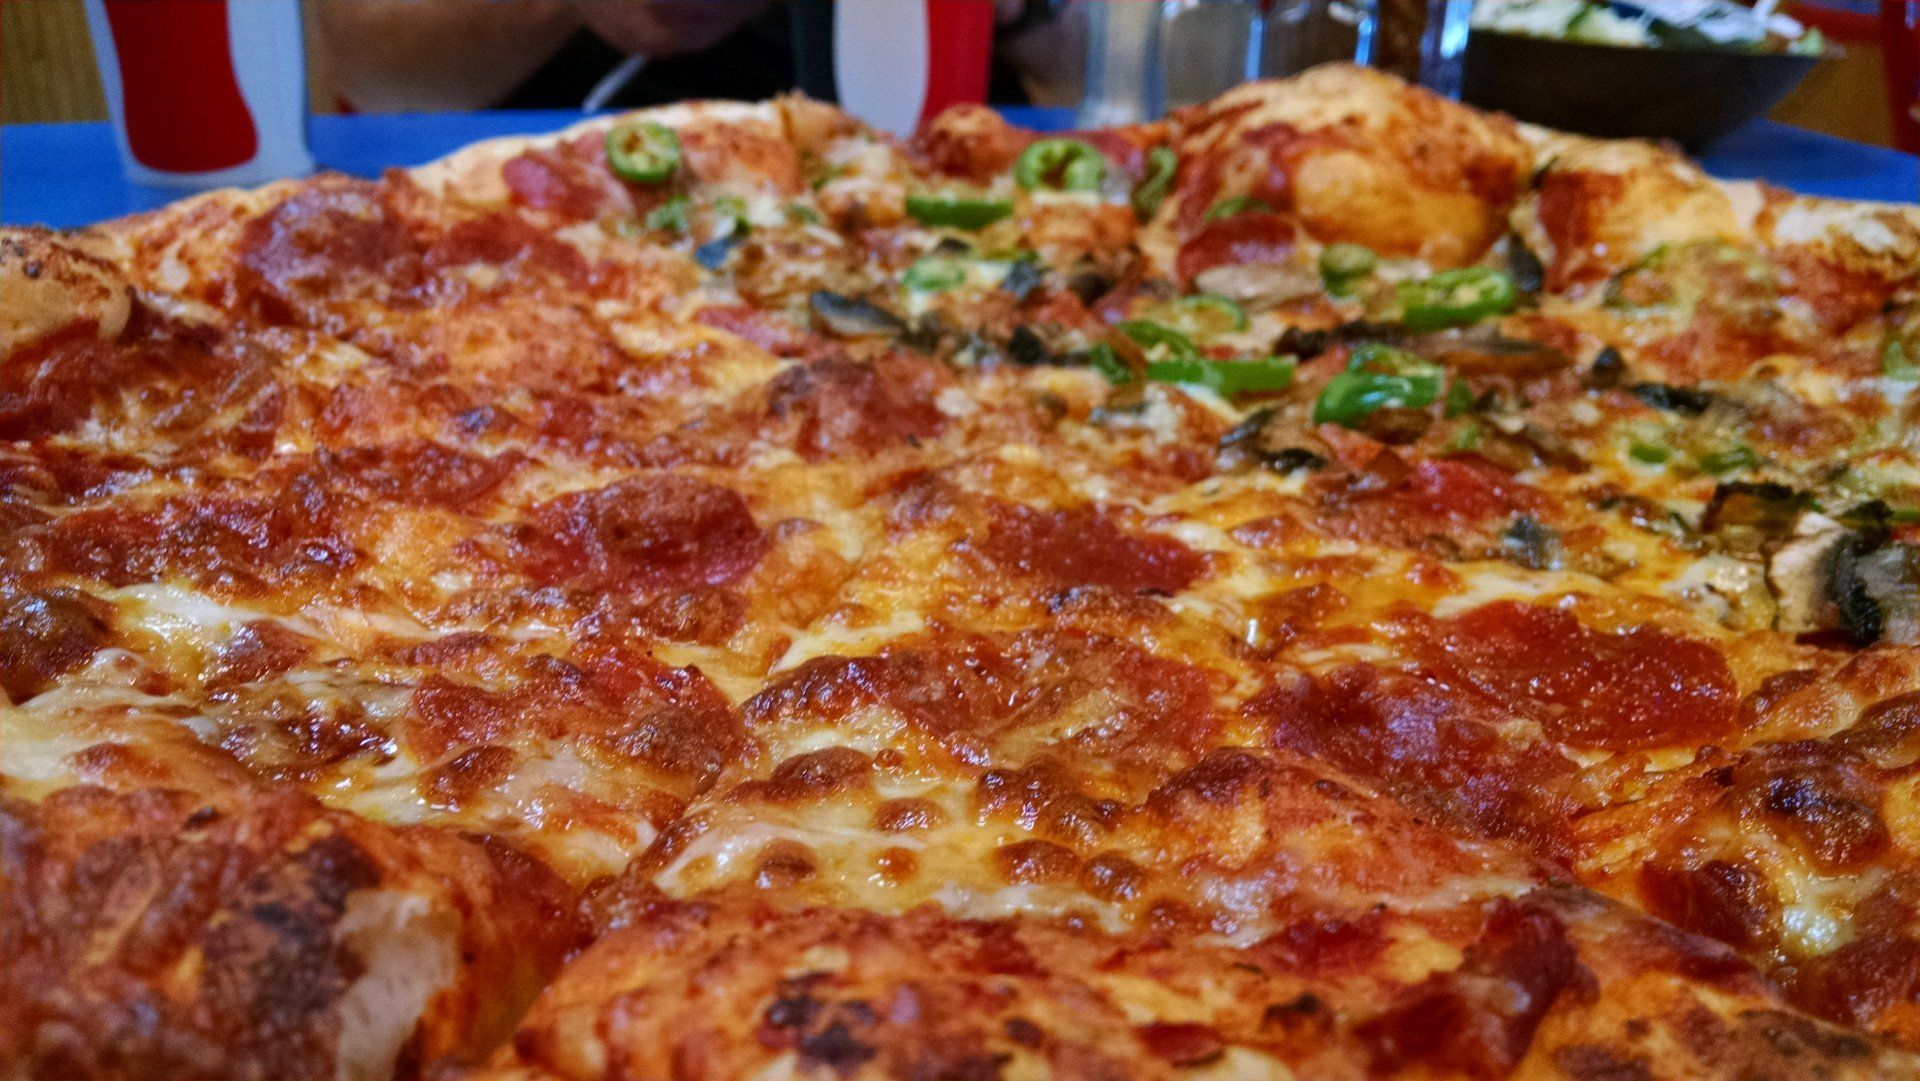 a close up of a pizza with pepperoni and cheese on a table .